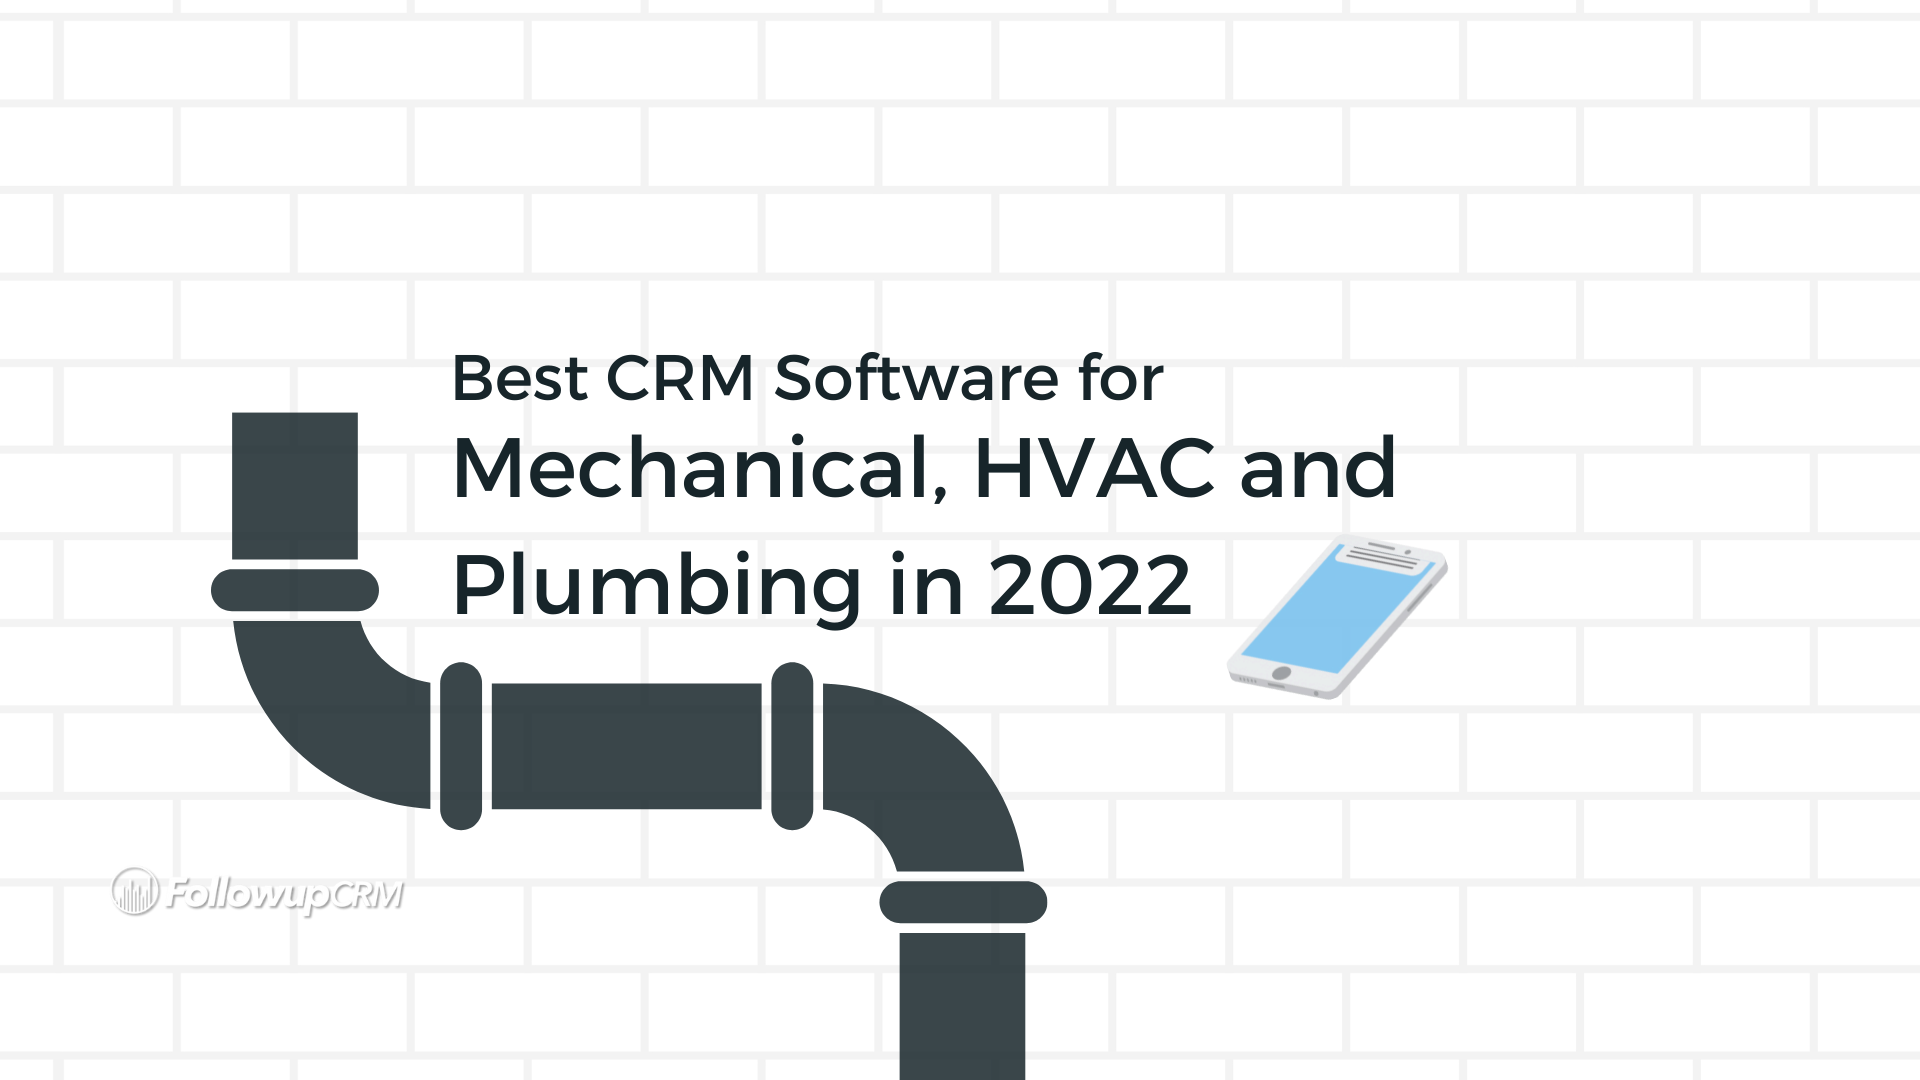 Best CRM Software for Mechanical, HVAC and Plumbing in 2022